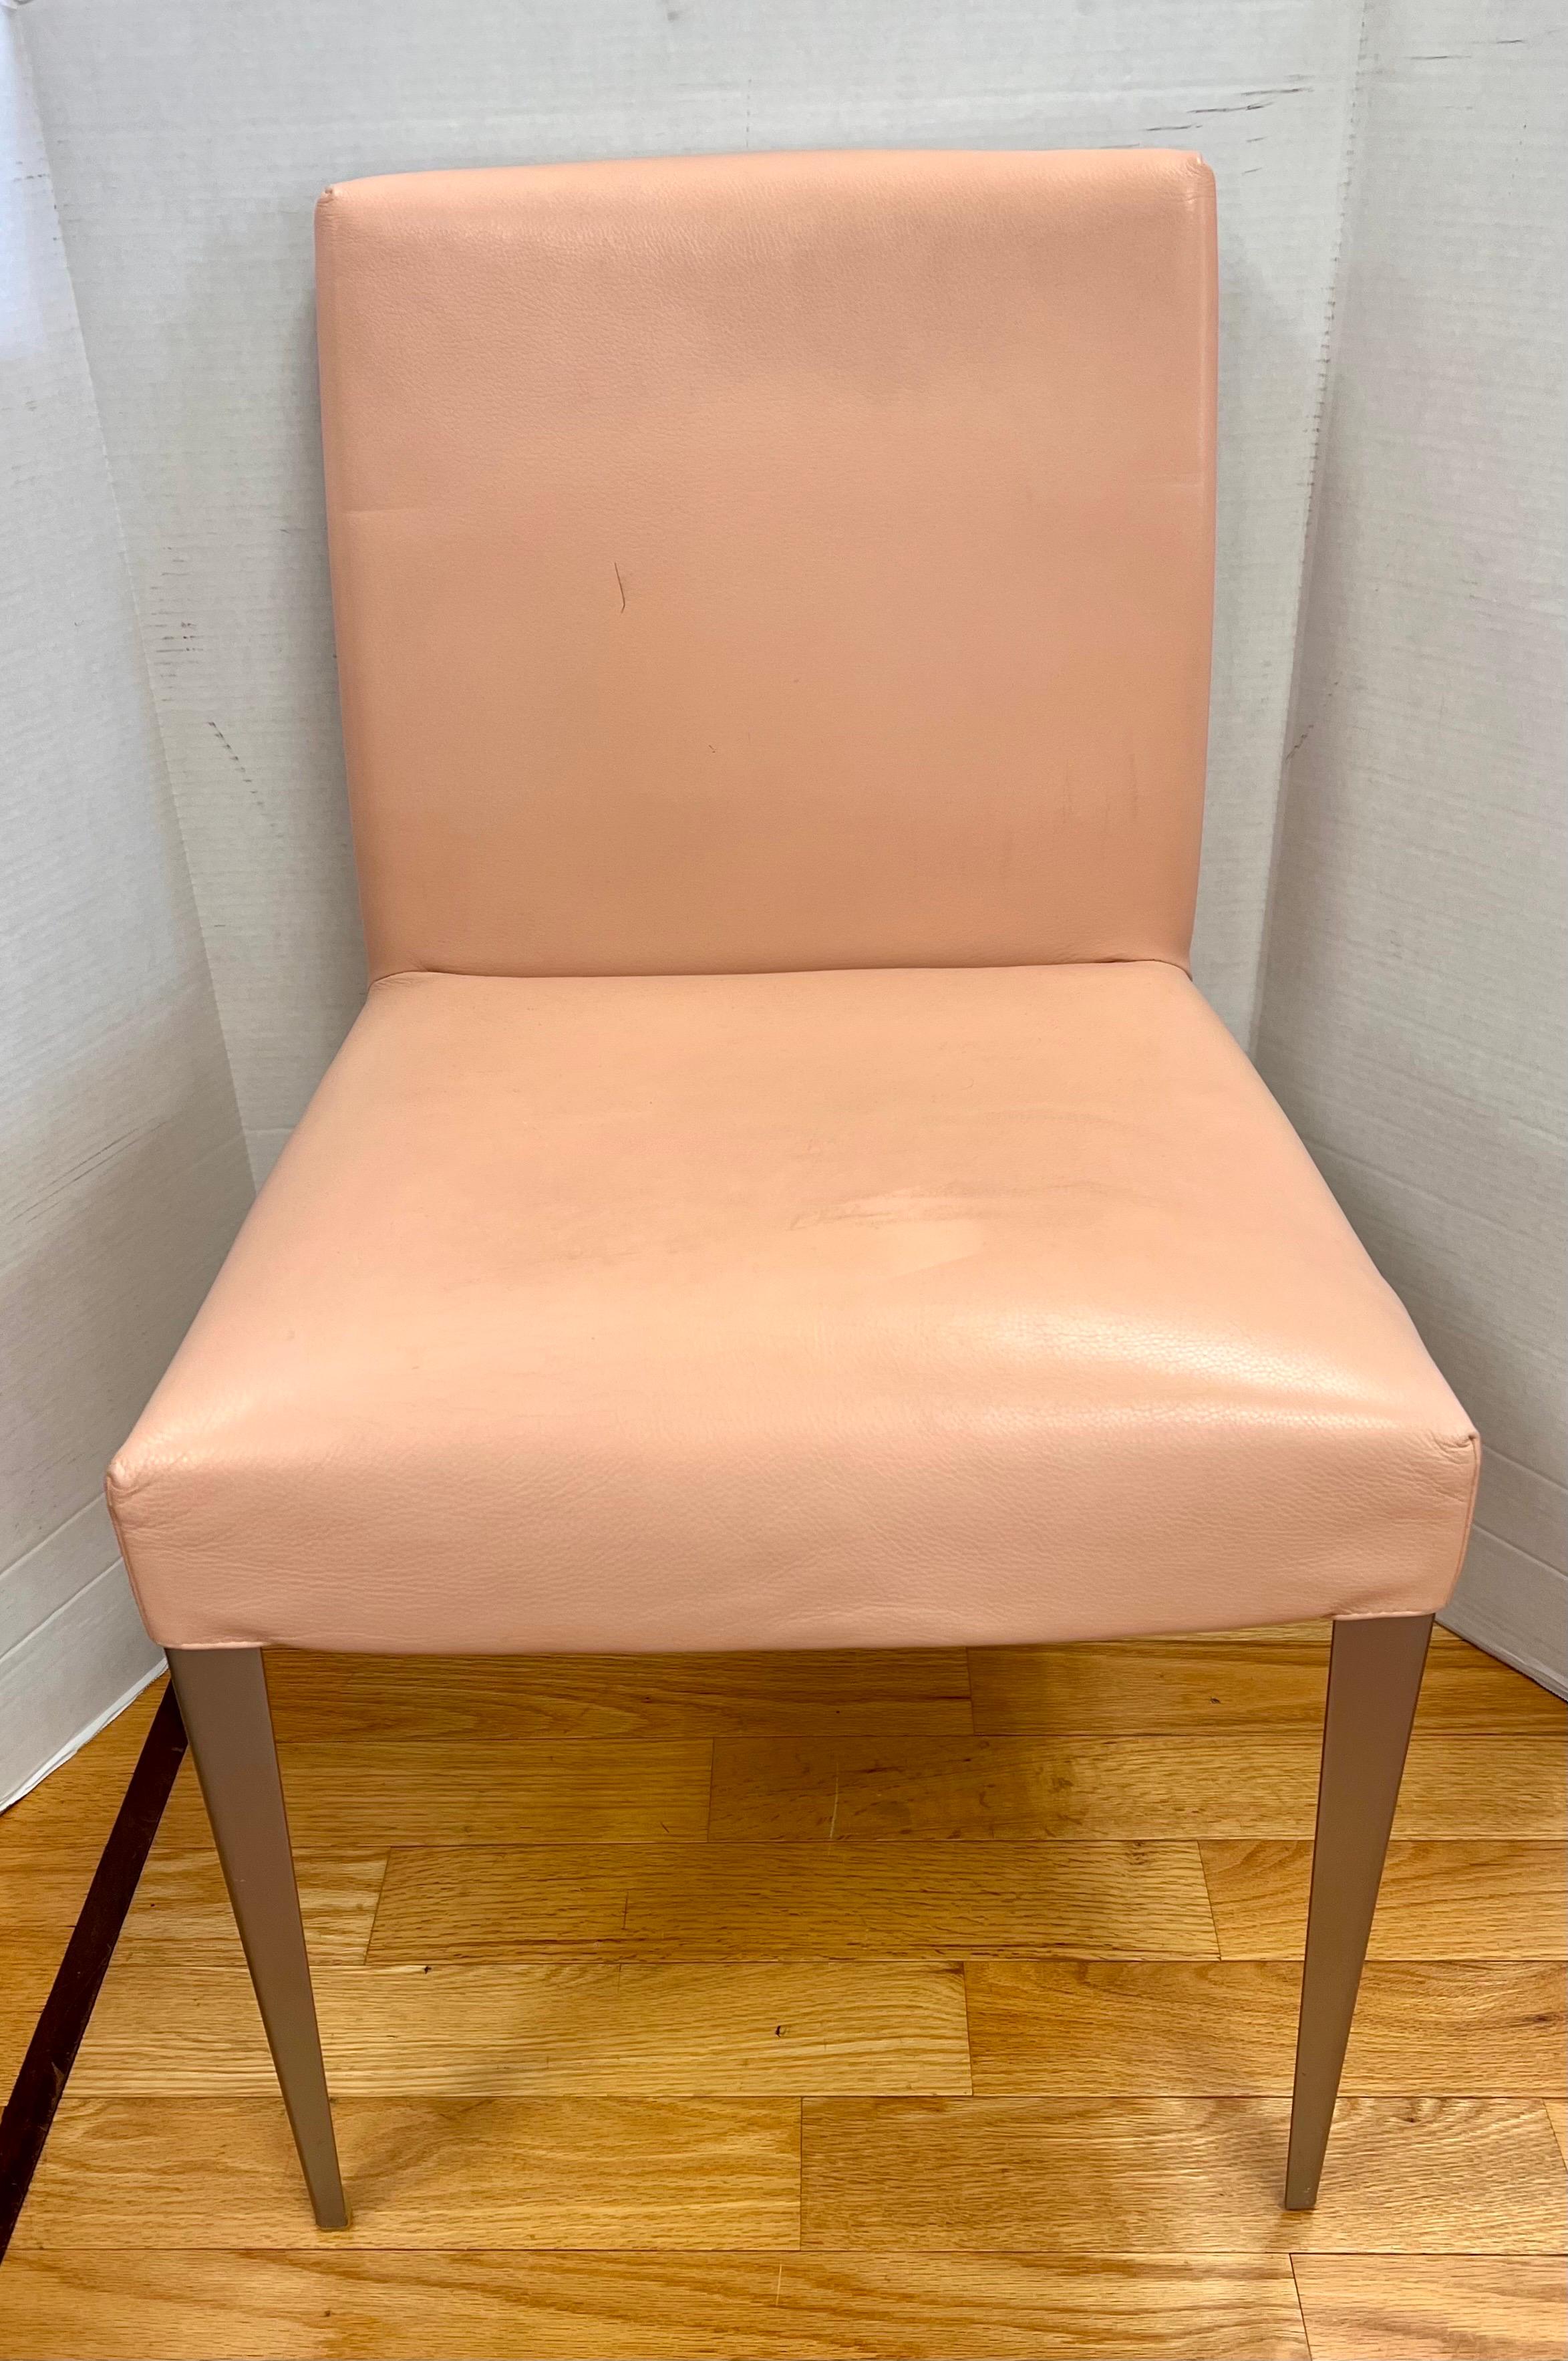 Gorgeous set of six B&B Italia Melandra dining chairs by Antonio Citterio. The chairs are in a pink leather and supported on grey steel legs. Each with the B&B Italia insignia stamped on the back.